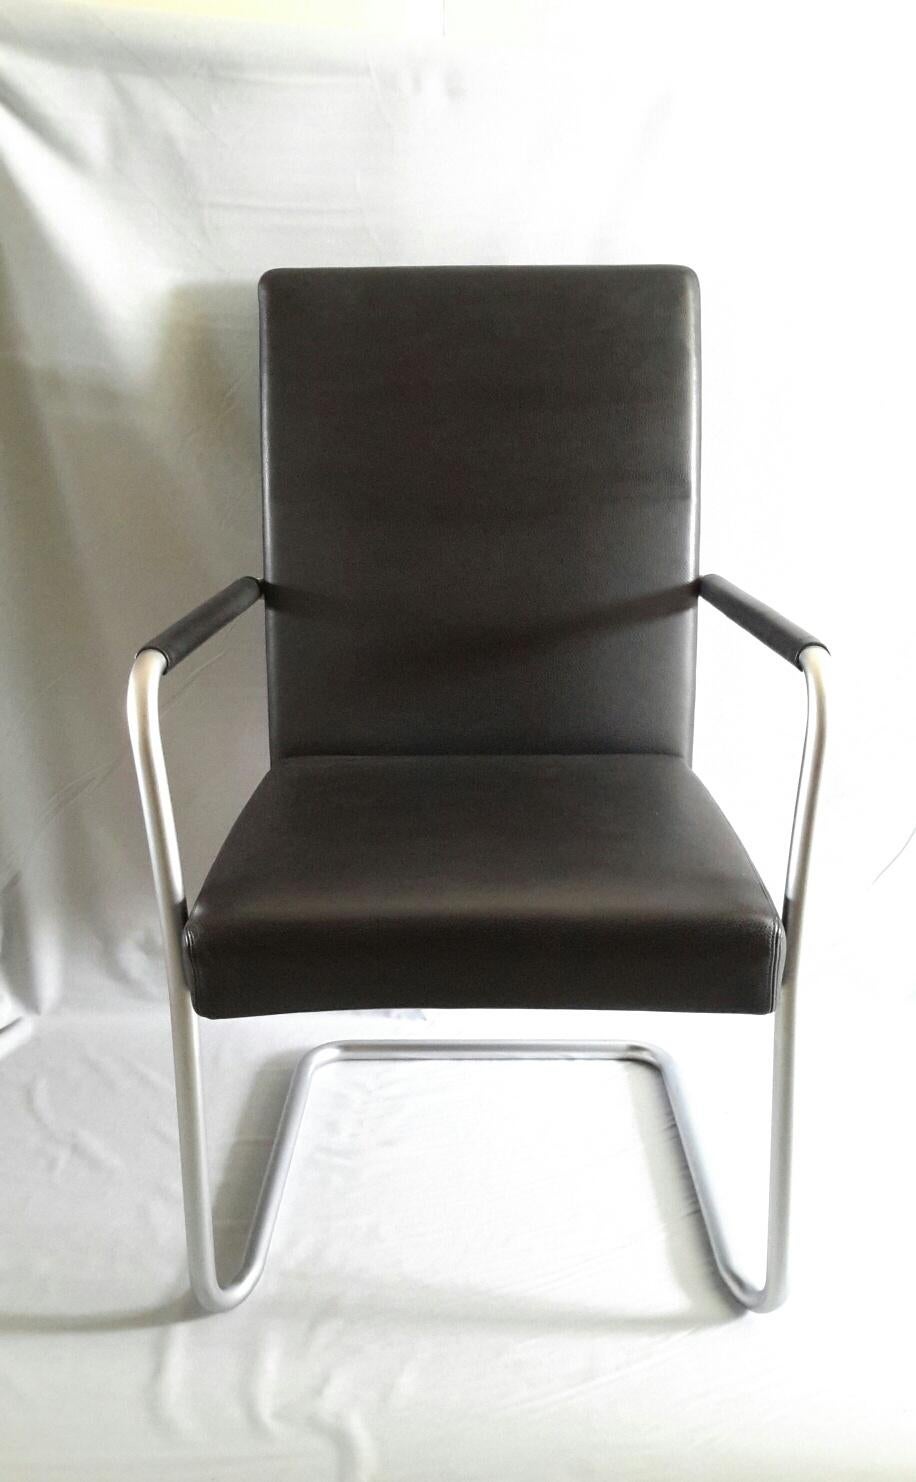 Anodized Walter Knoll Black Leather Armchairs, Line Jason, Austria, 1997 For Sale